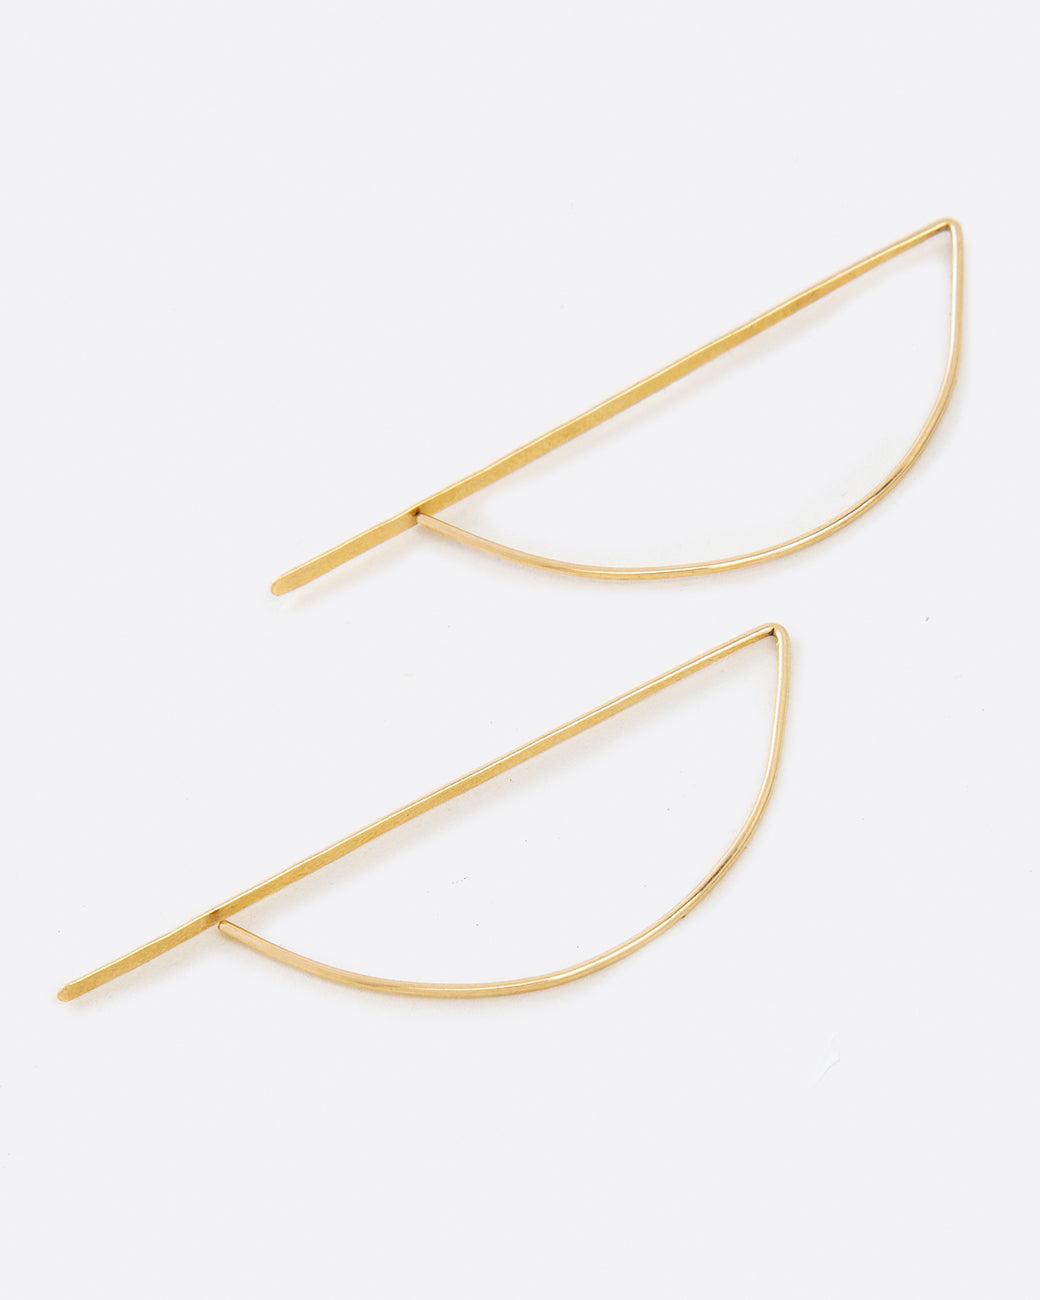 Called the bow hook earrings, this unusual shape is a unique take on a hoop earring with a flat edge that catches the light.